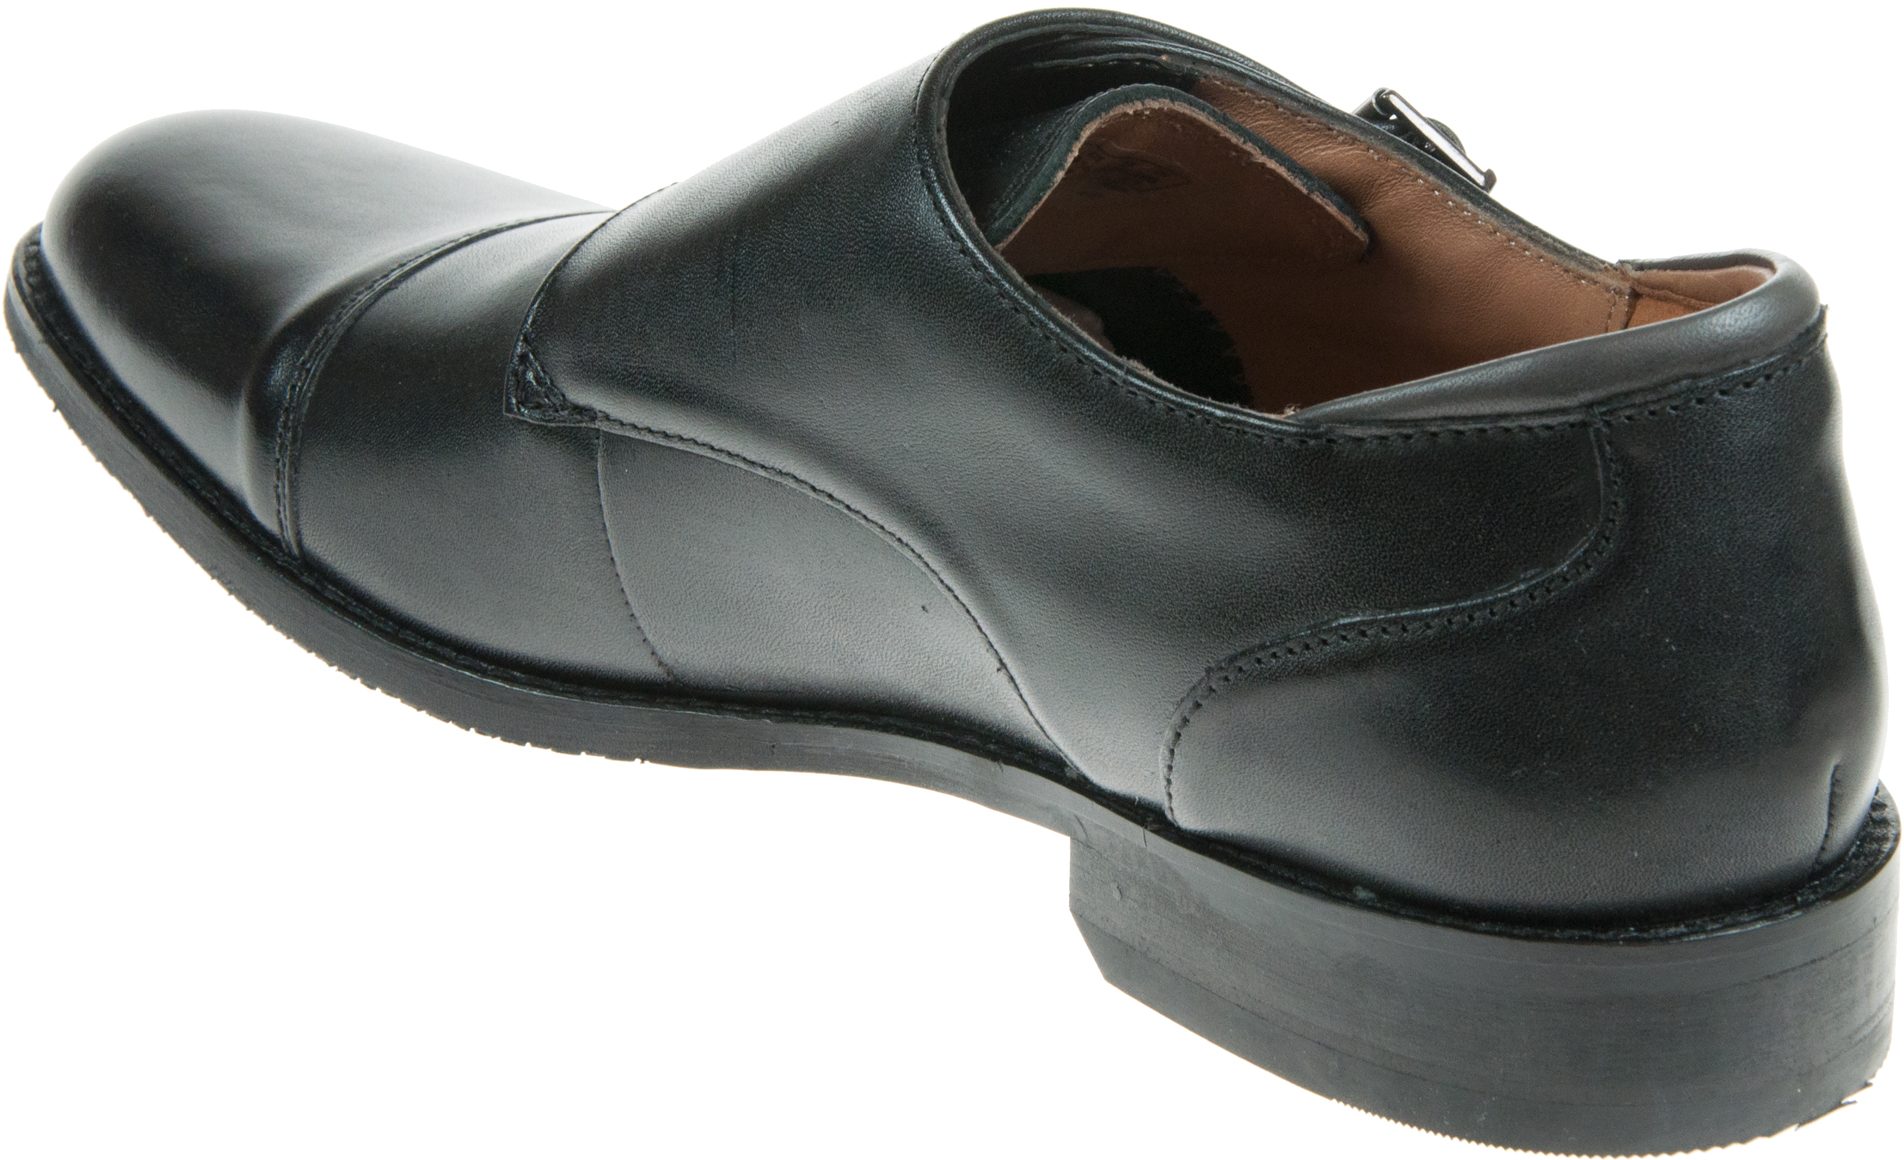 Clarks Craft Arlo Monk Black Leather 26172451 - Formal Shoes ...